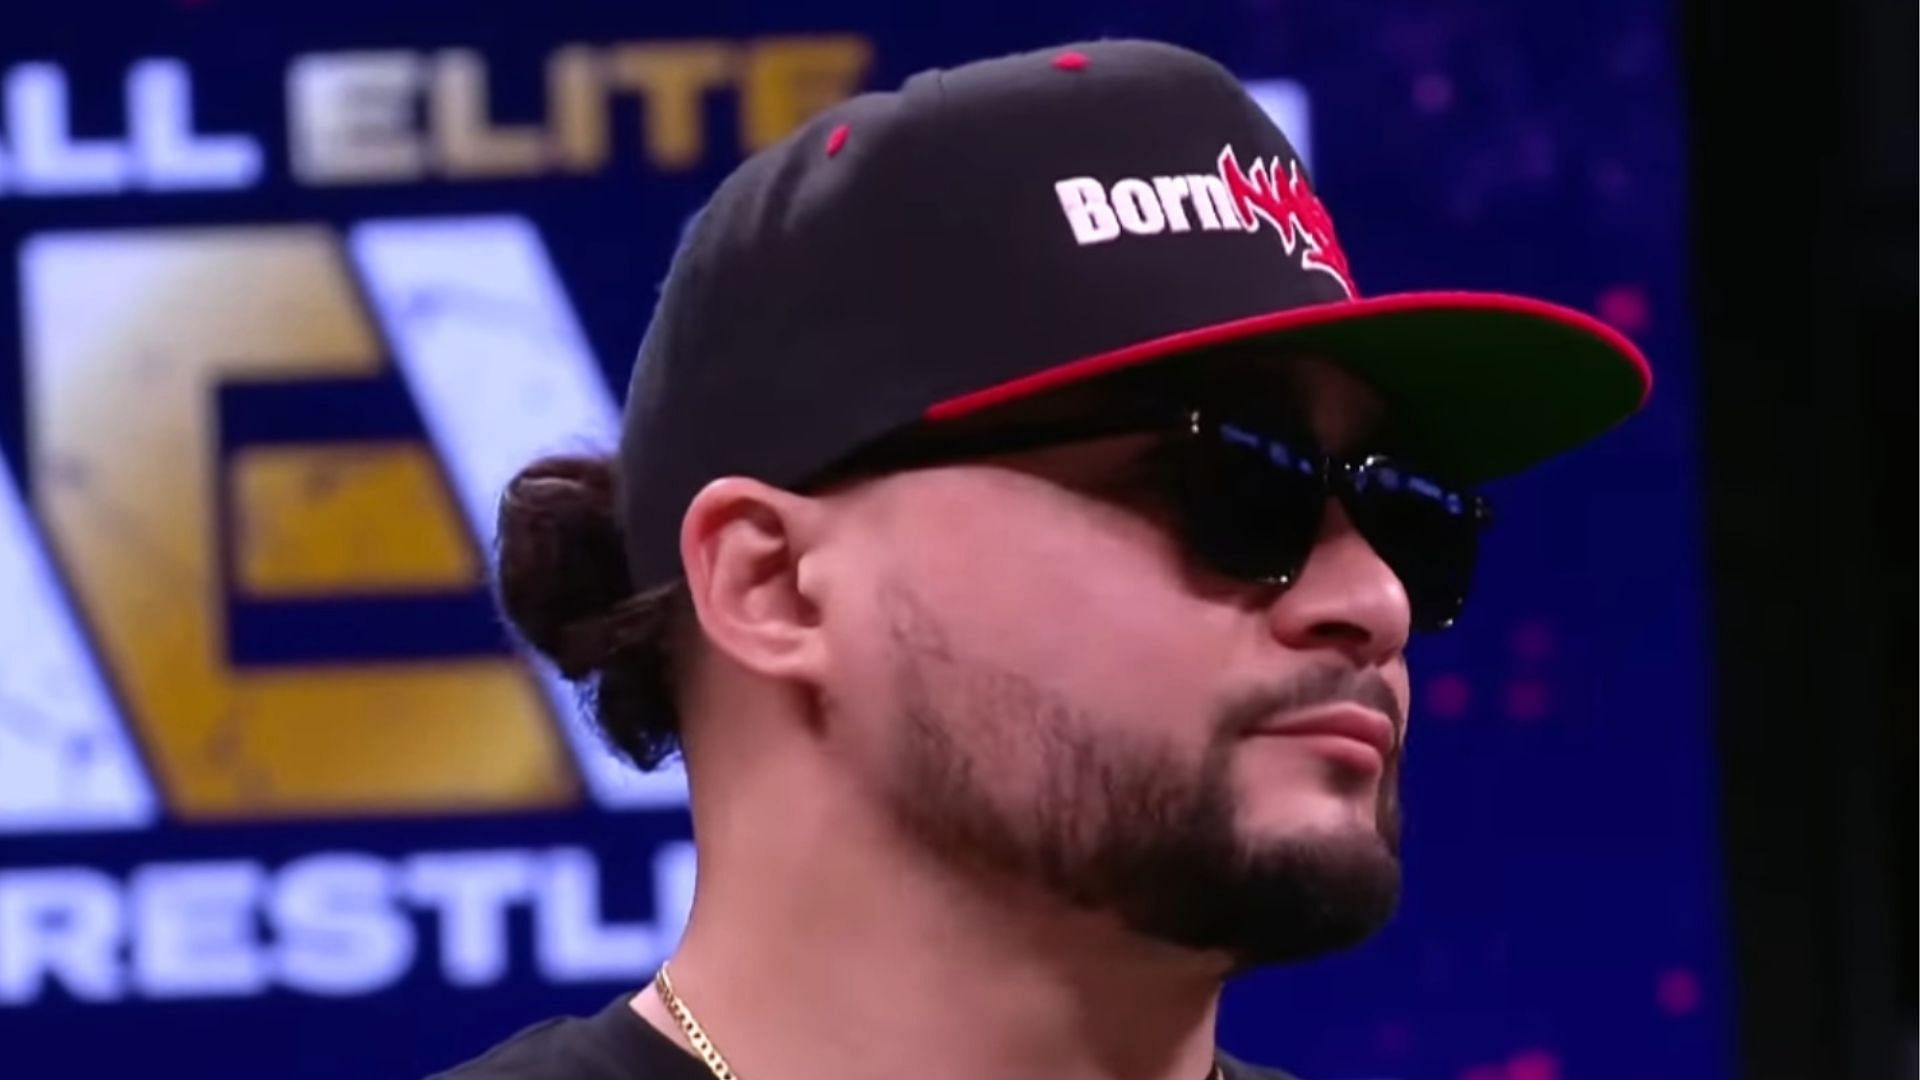 Mike Santana at an AEW Dynamite event in 2022